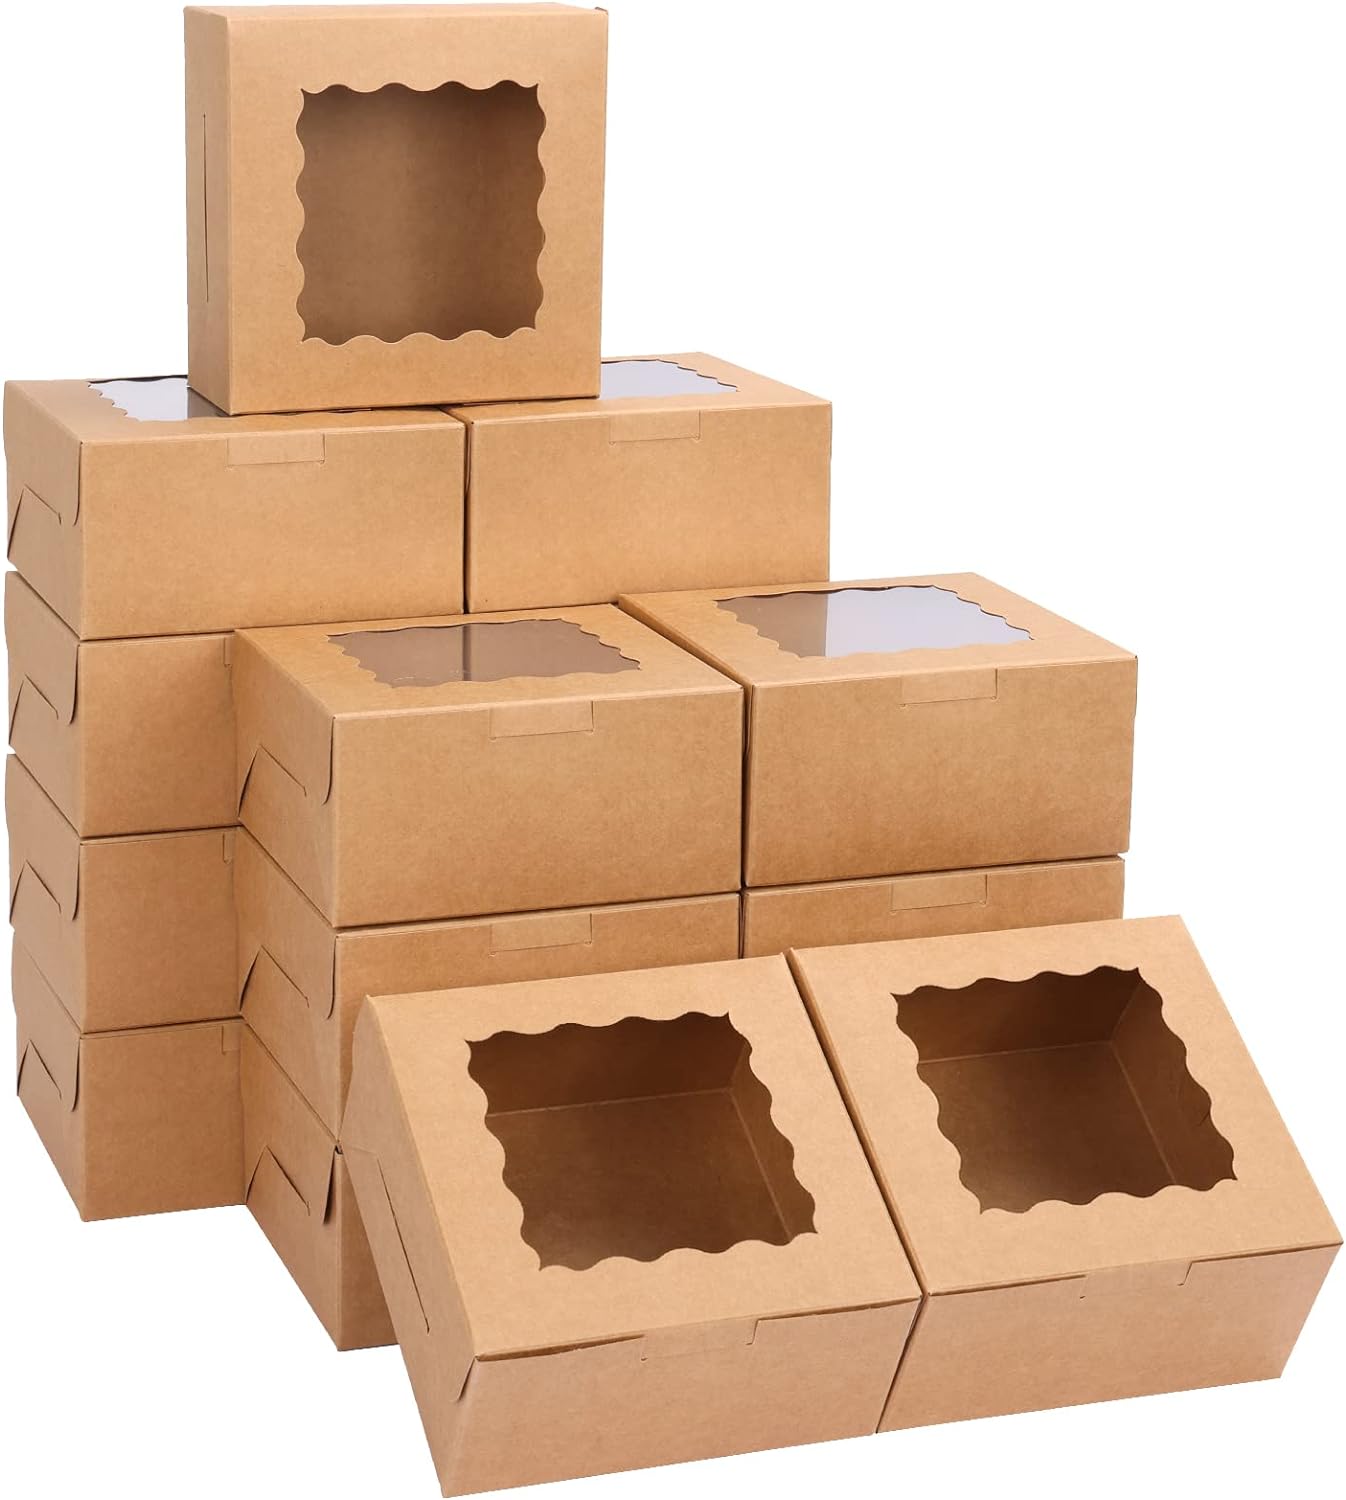 Moretoes 80pcs Bakery Boxes with Window 6x6x3 Inches Kraft Cookie Boxes Small Treat Boxes Pastry Boxes for Chocolate Covered Strawberries, Macarons, Cupcakes, Goodies, Donuts